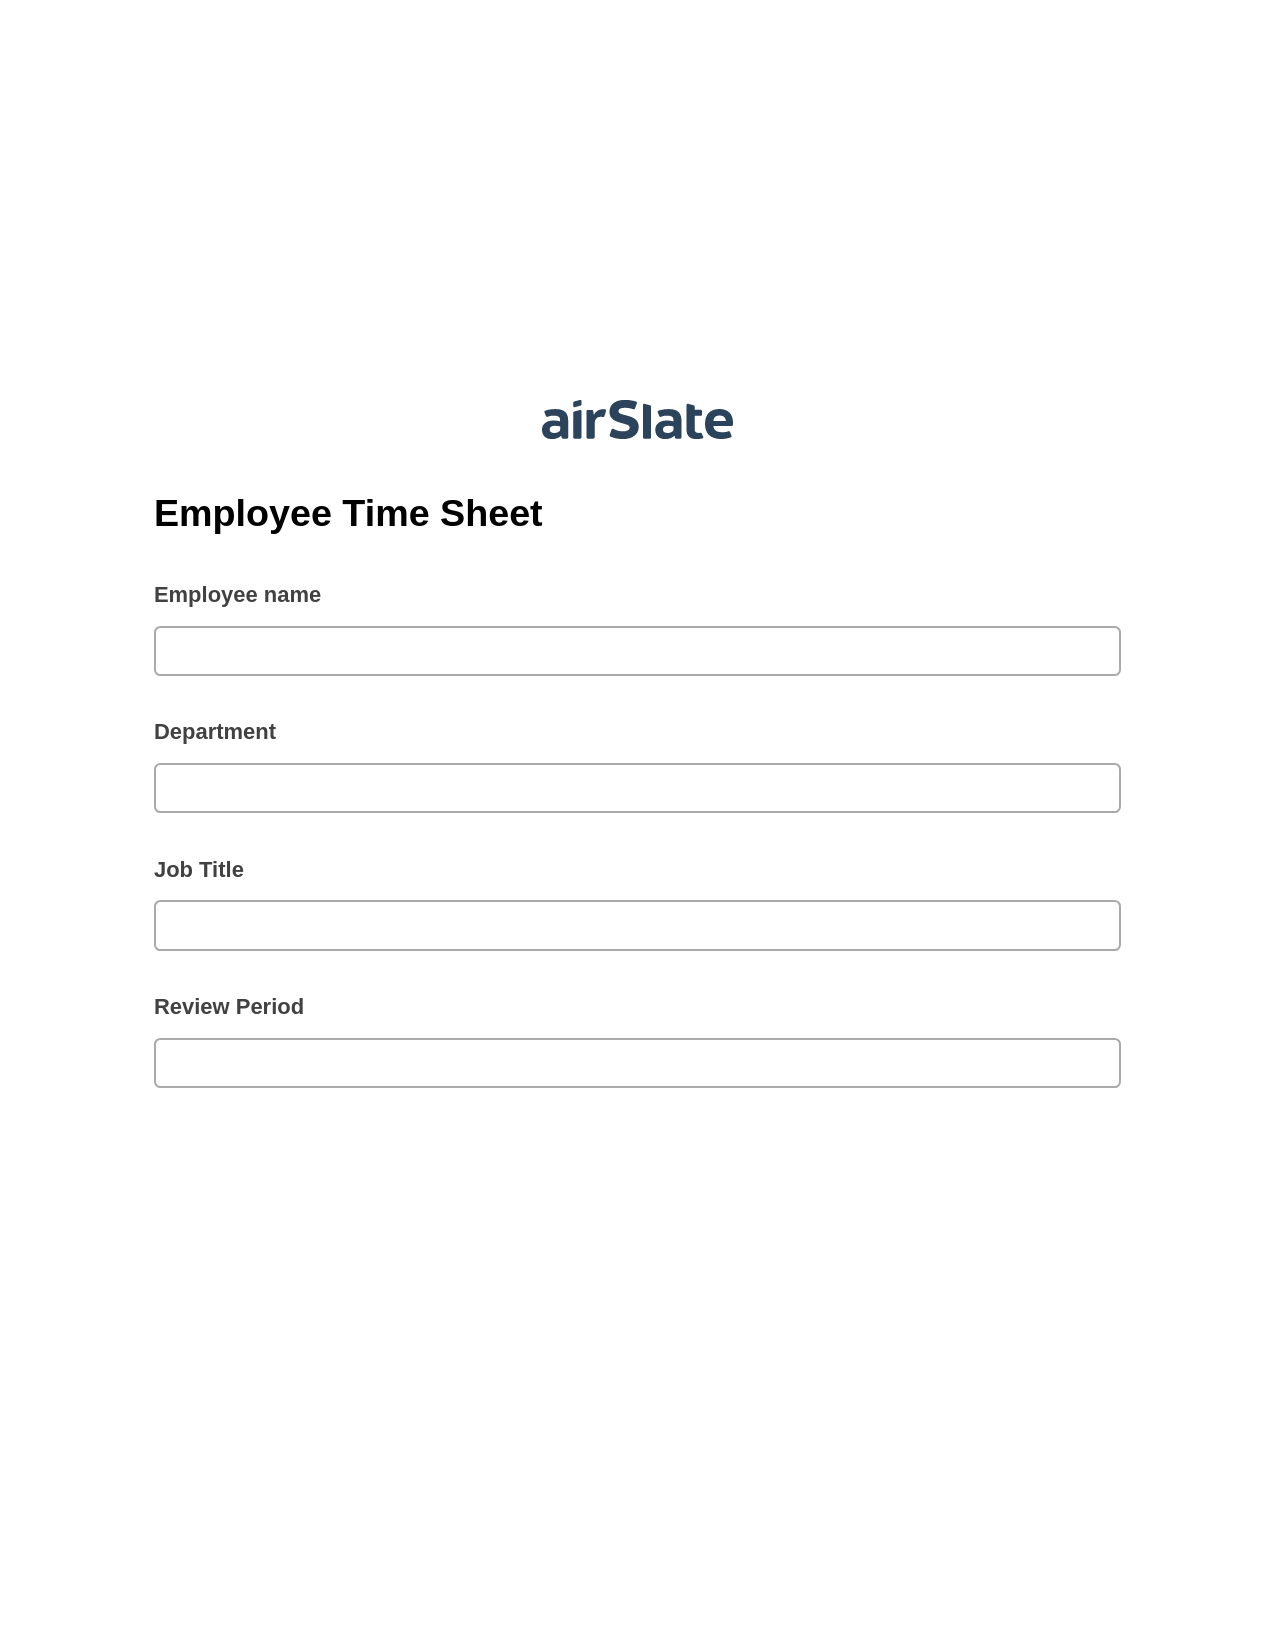 Employee Time Sheet Pre-fill from Litmos bot, Create Salesforce Records Bot, Archive to Dropbox Bot